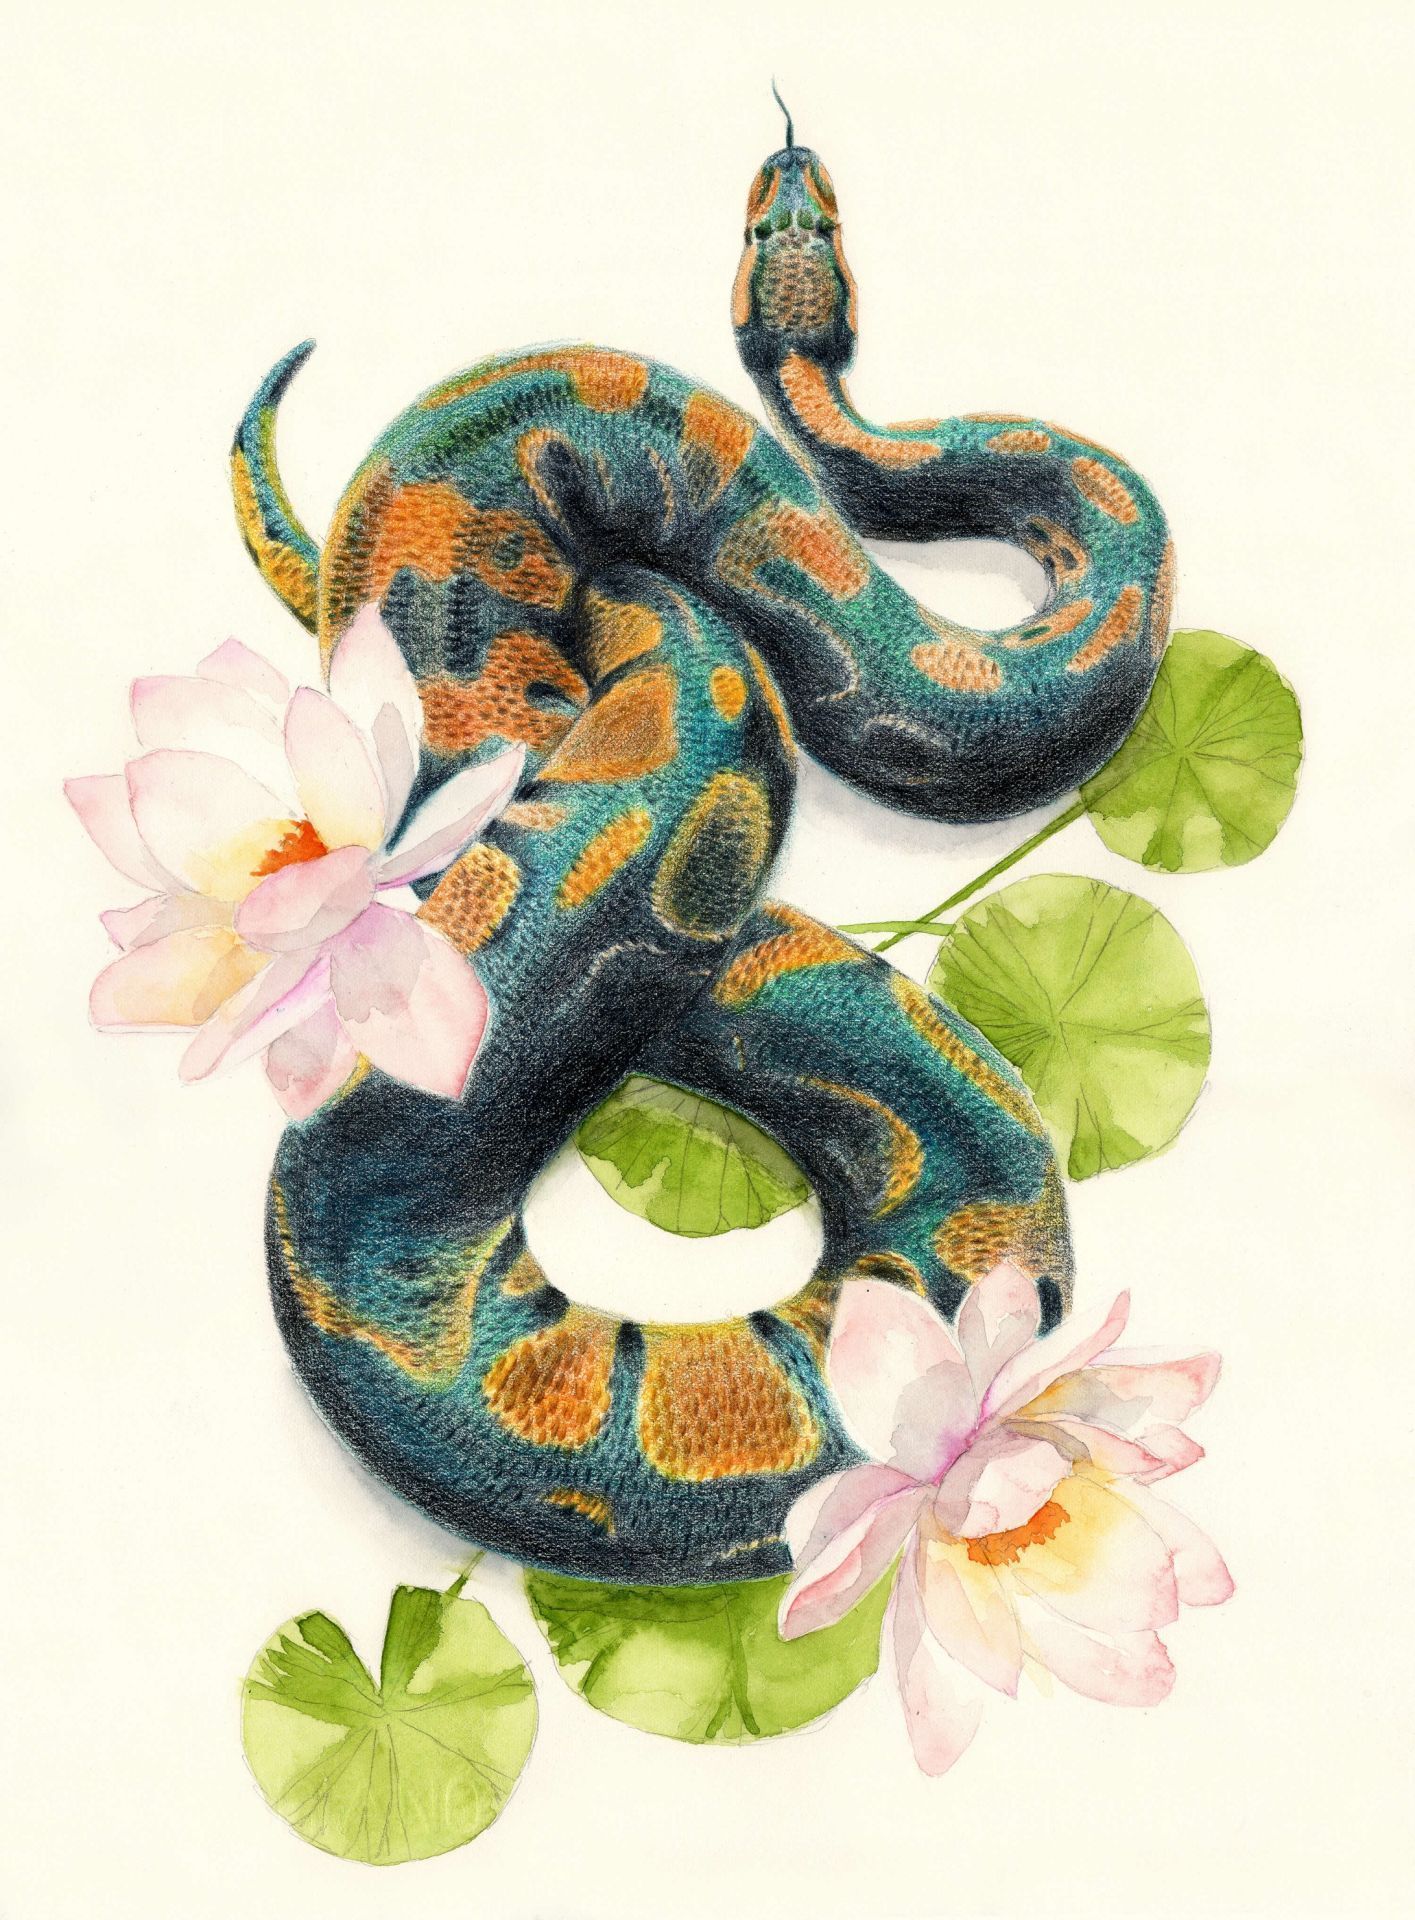 A snake is sitting on top of some water lilies - Snake